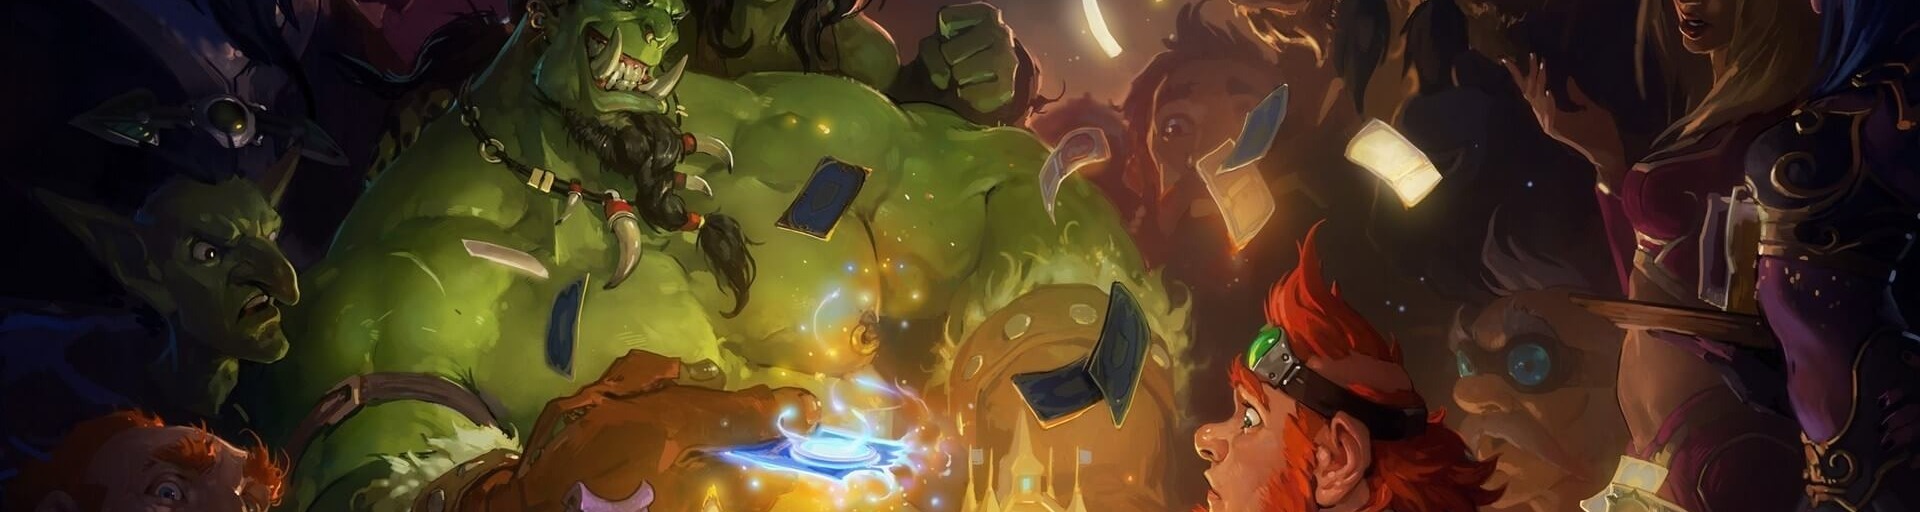 Hearthstone: Heroes of Warcraft - Deck of Cards bg